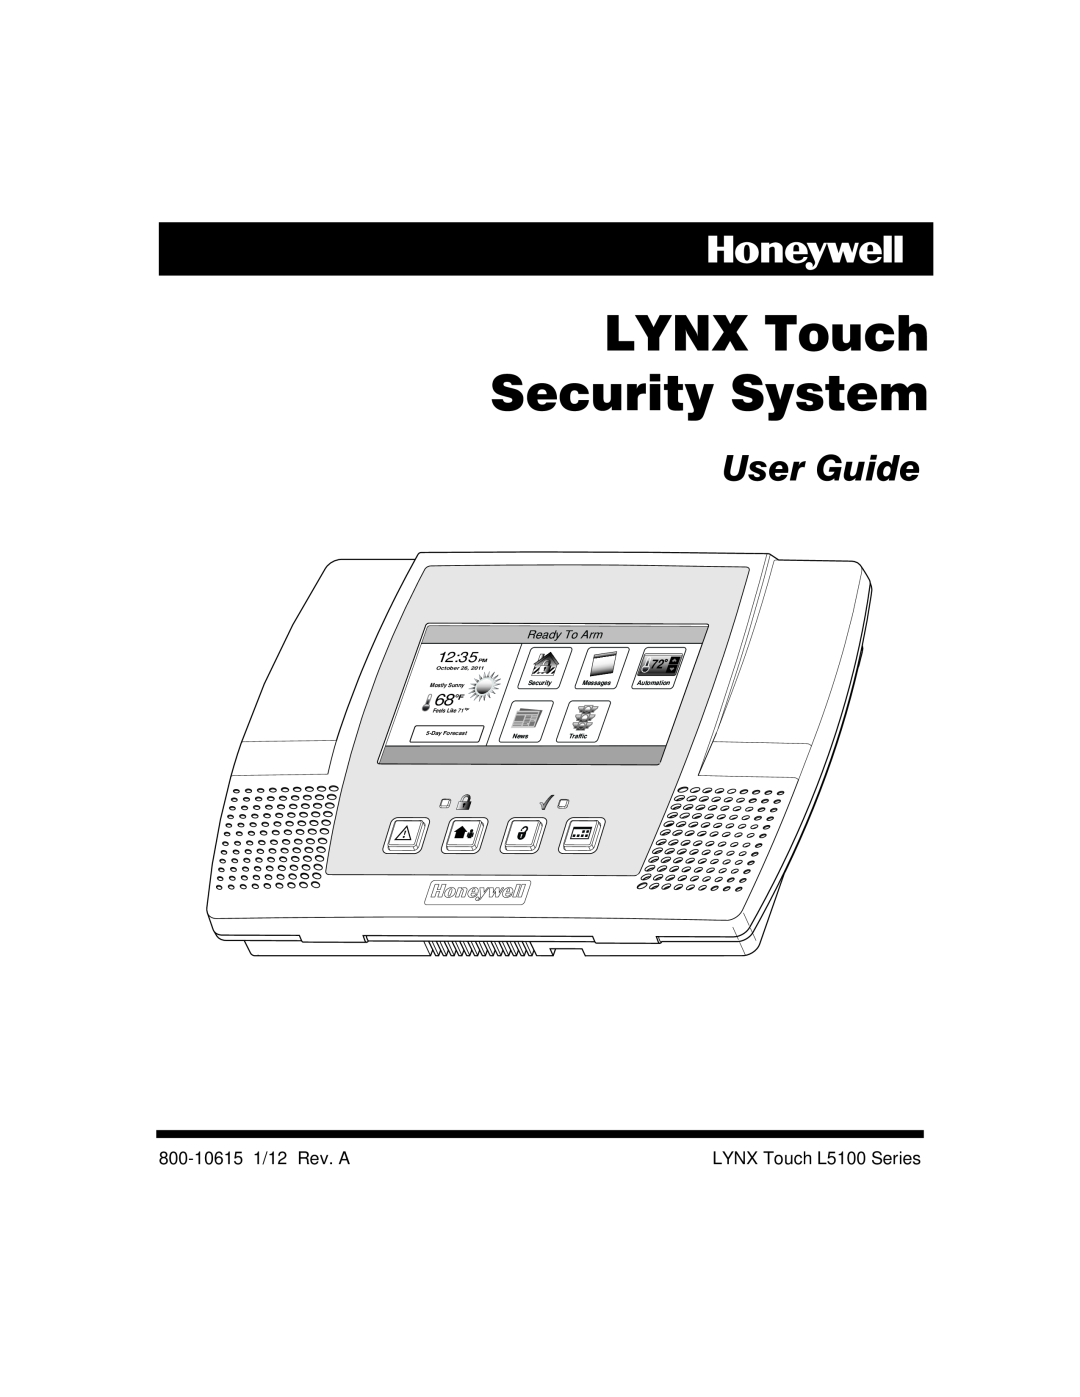 Honeywell L5100 manual LYNX Touch Security System, User Guide, 68 F, 12 35 PM, Ready To Arm, Messages, Automation, News 